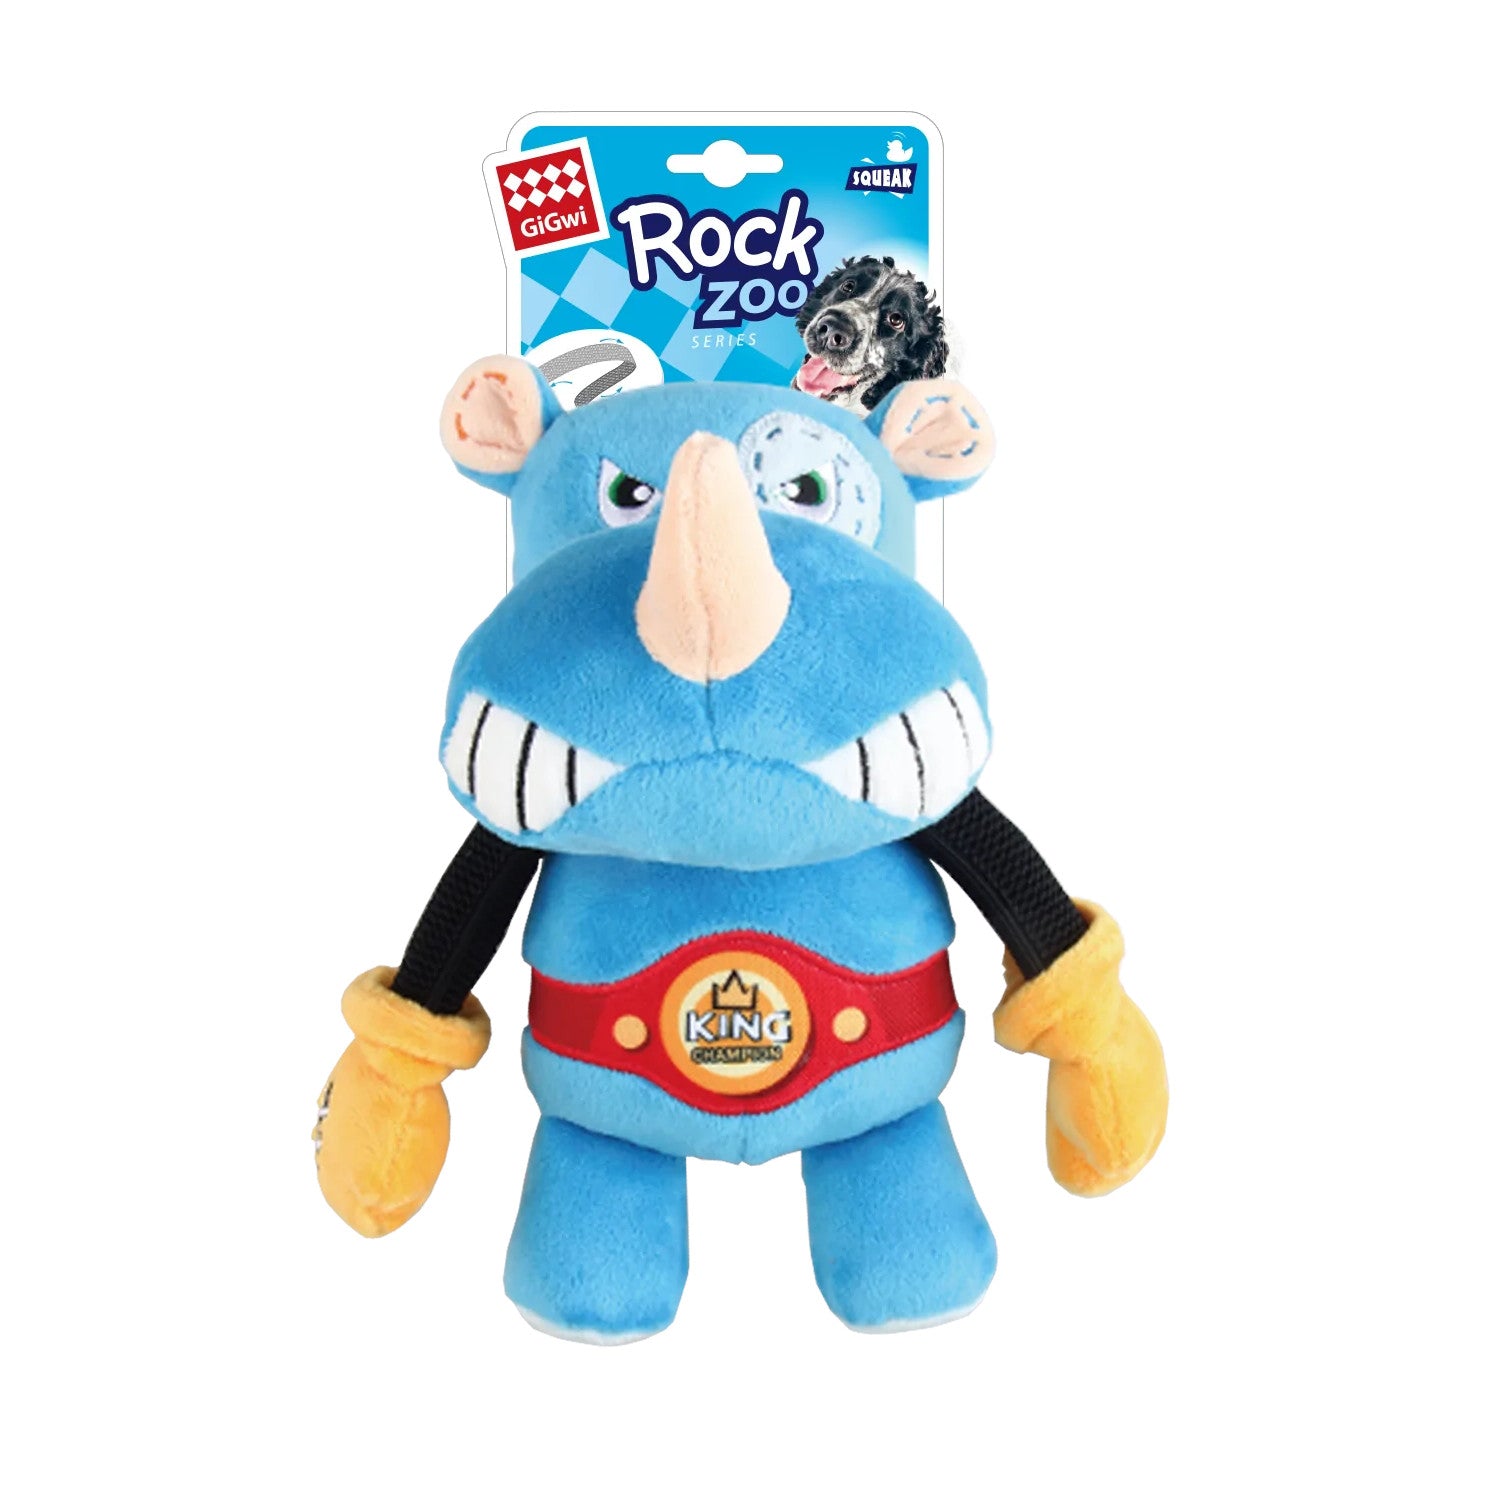 GIGWI Rock Zoo Rhino King Boxer Dog Toy with Squeakers